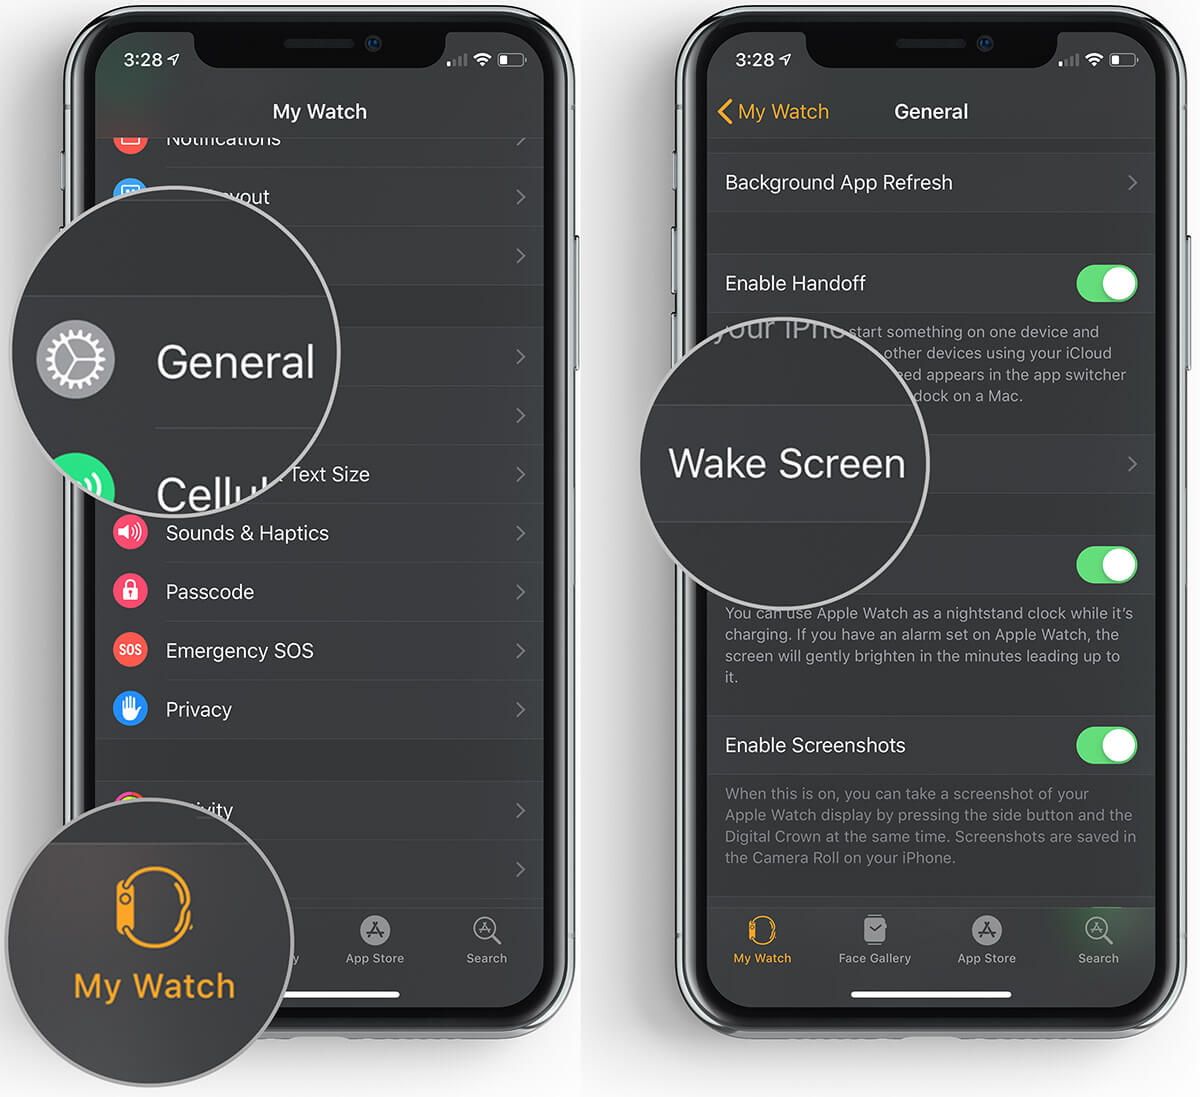 Tap on General then Wake Screen in Apple Watch App on iPhone